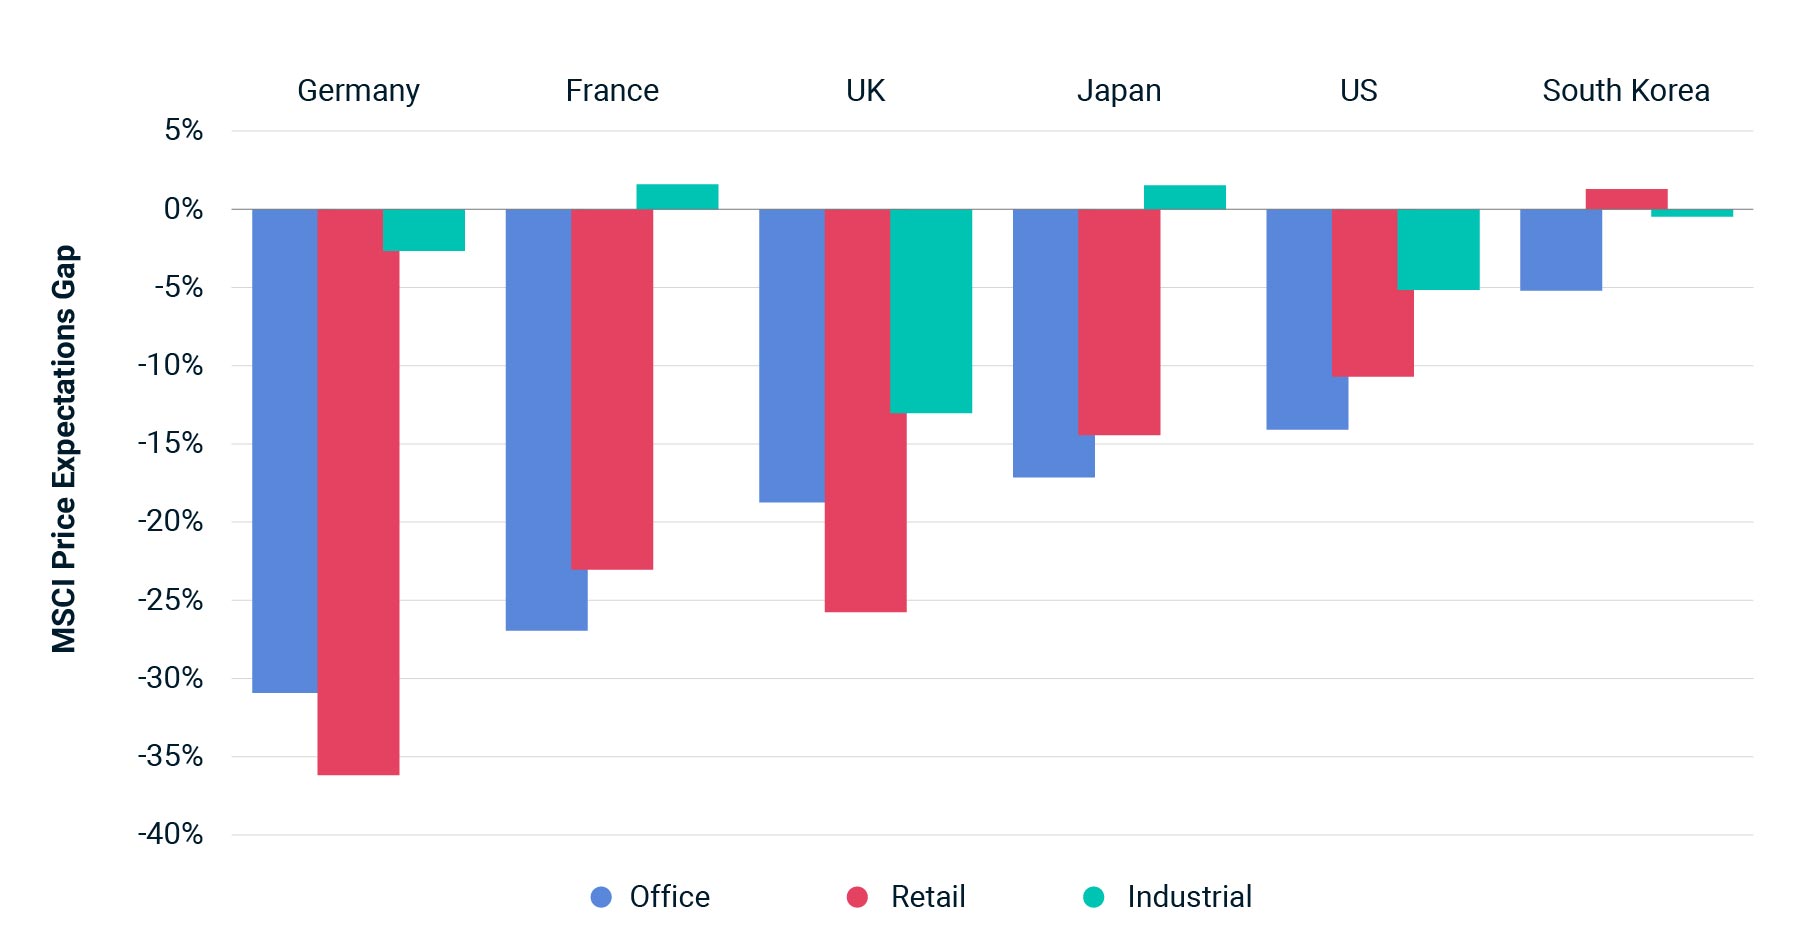 This column chart shows the price expectations gap for offices, retail and industrial in a selection of leading global markets.